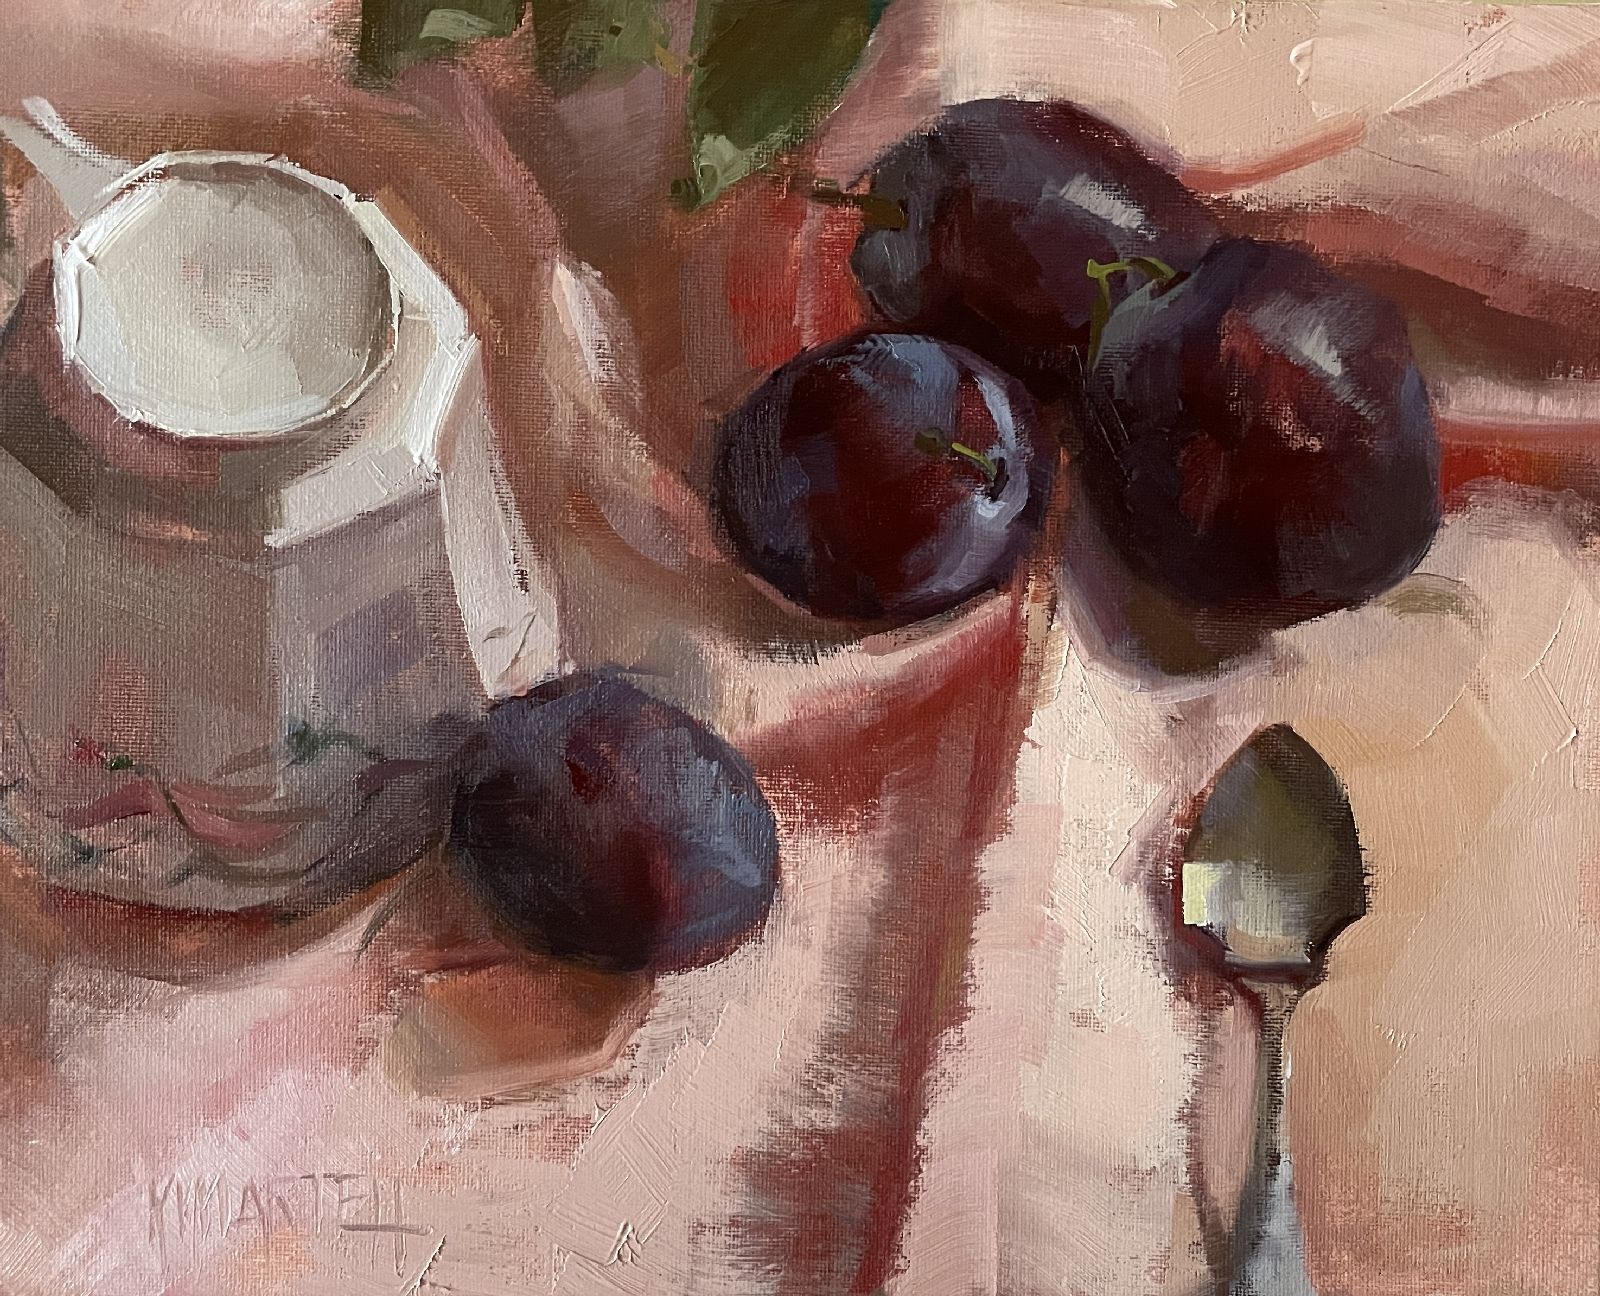 Plums for Tea by Kayla Martell